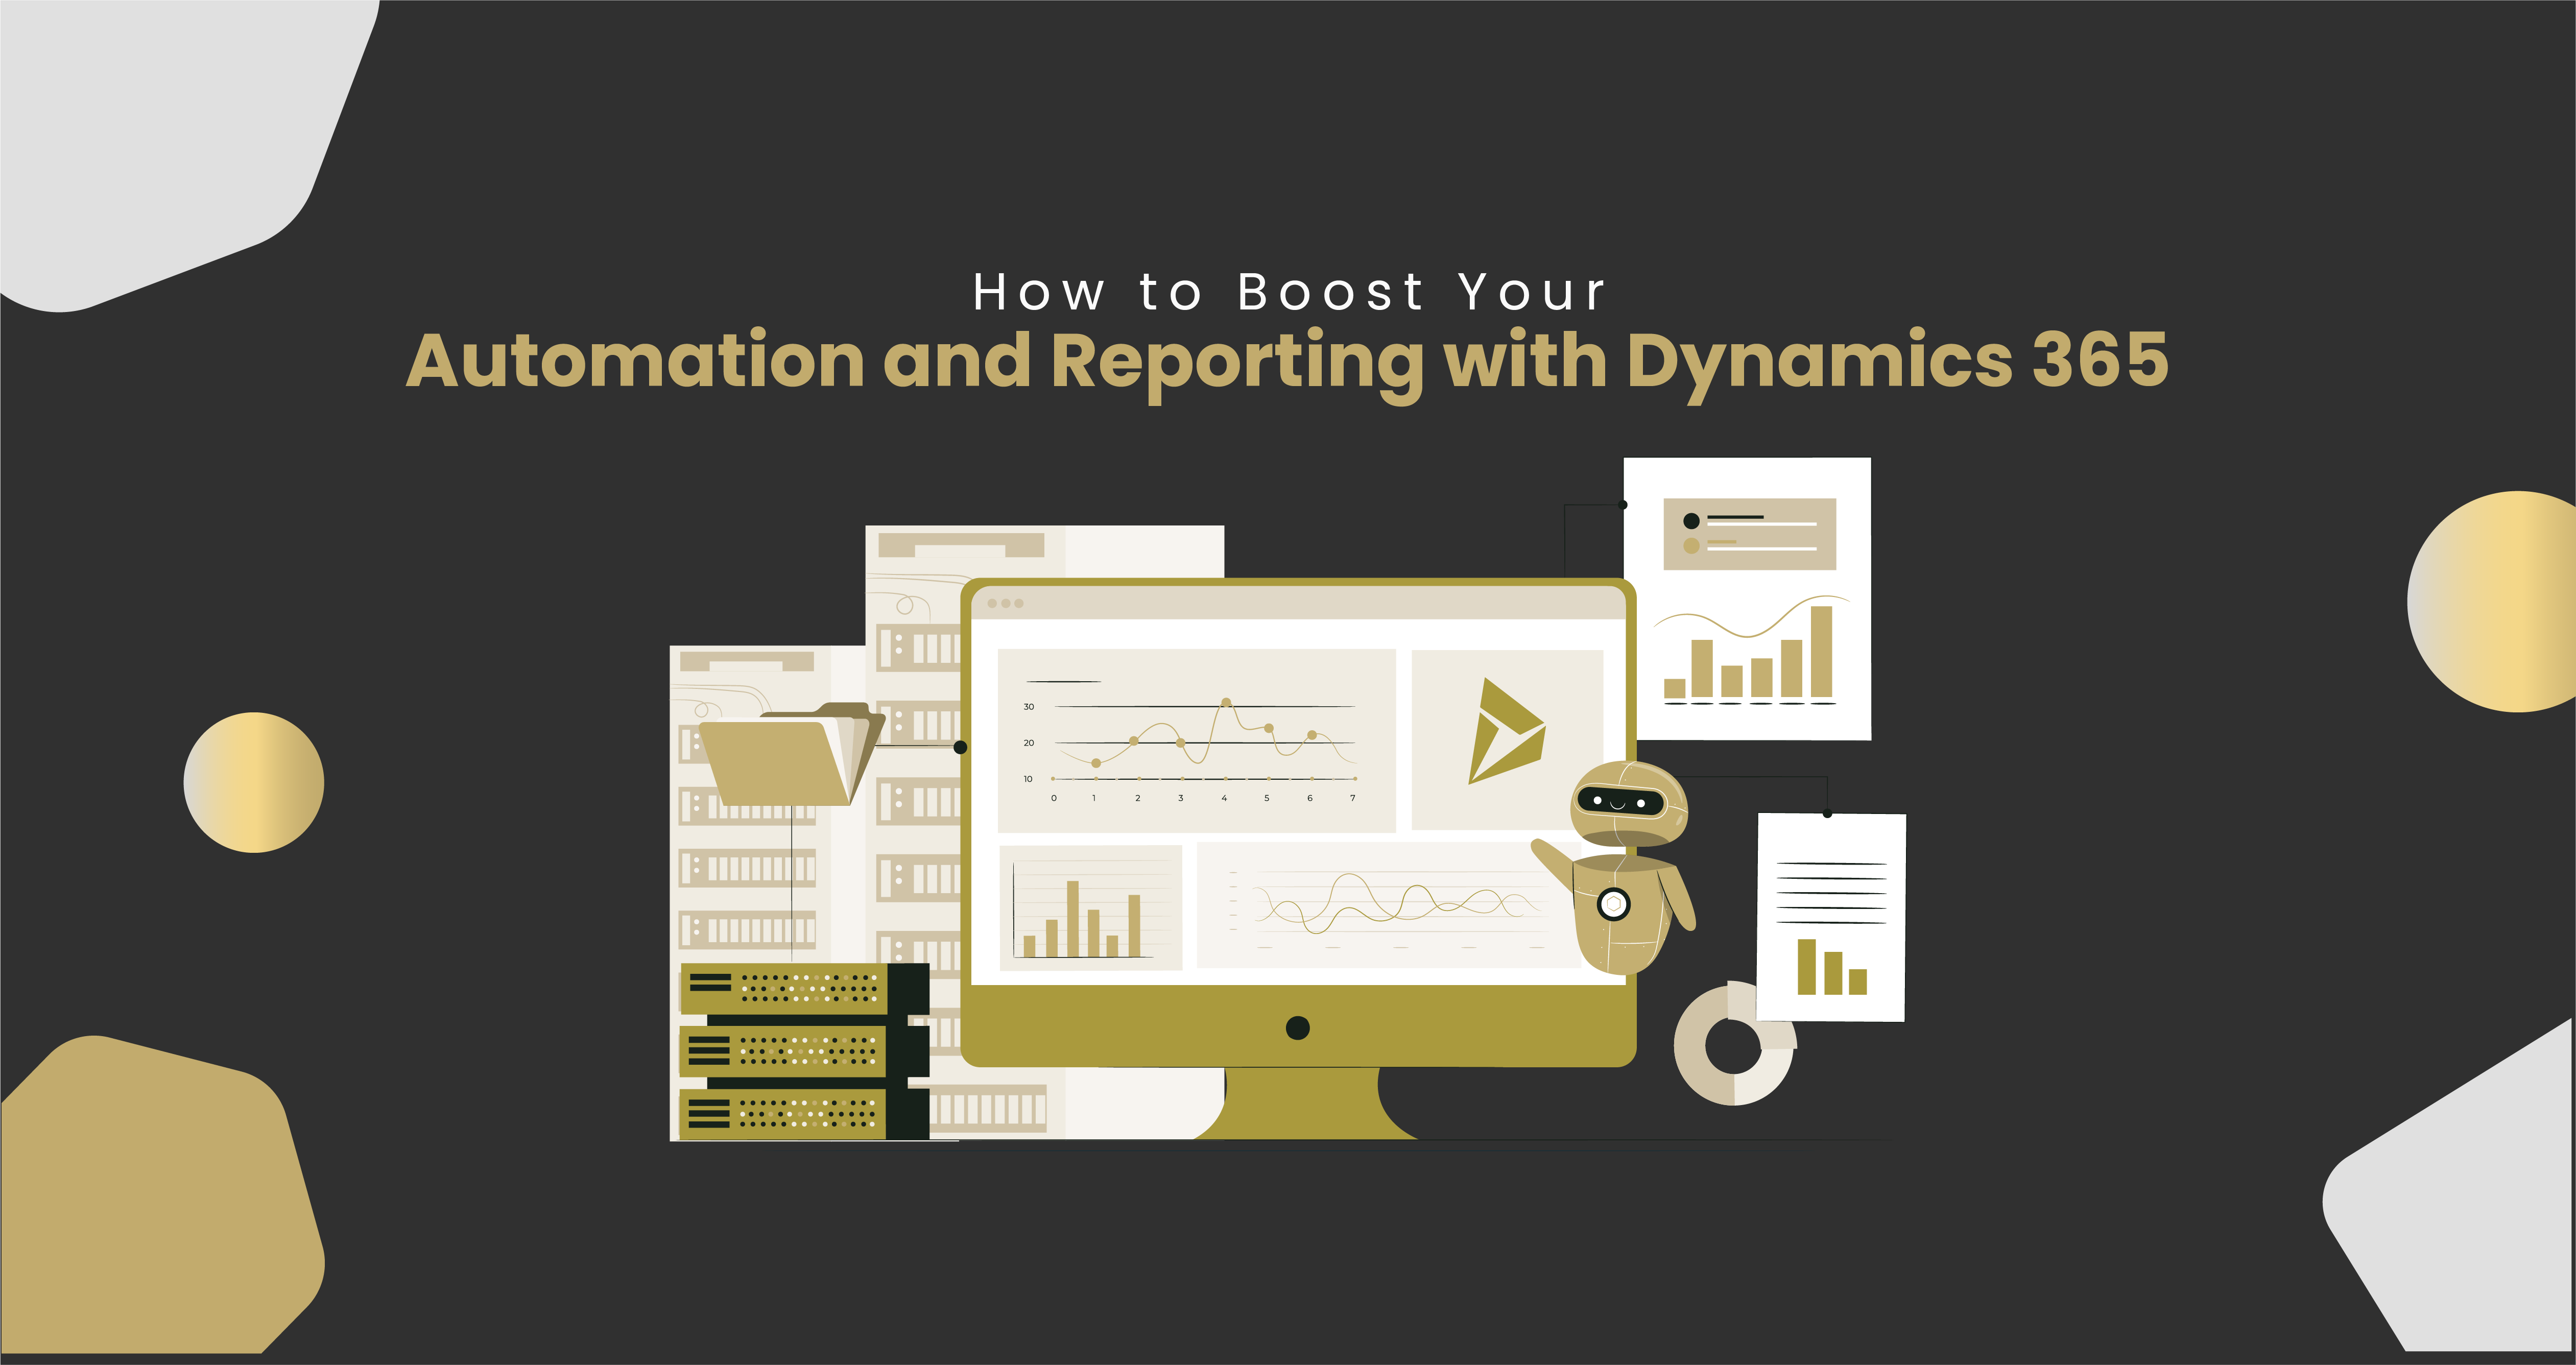 How to Boost Your Automation and Reporting with Dynamics 365